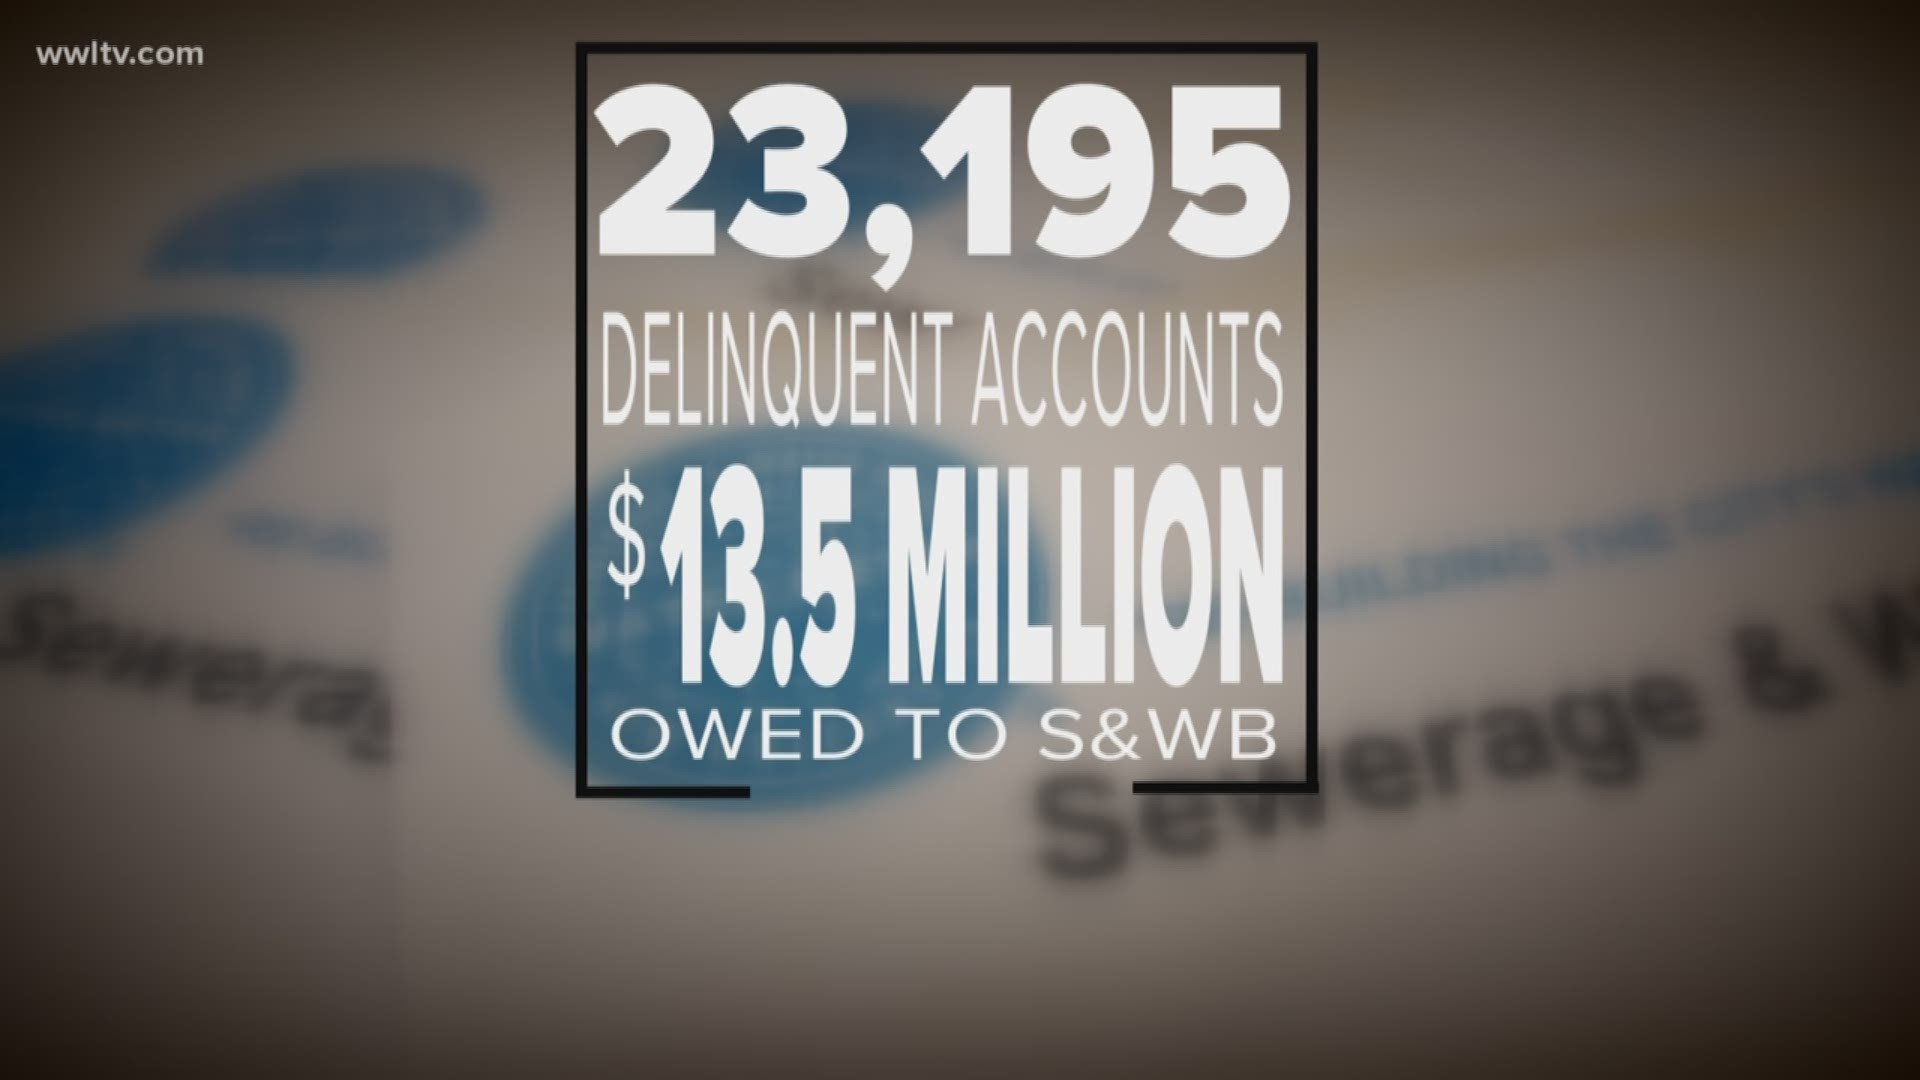 With 23,195 delinquent accounts and another 26,000 accounts under investigation since 2016, the S&WB is feeling the effects of uncollected revenue from their customers.